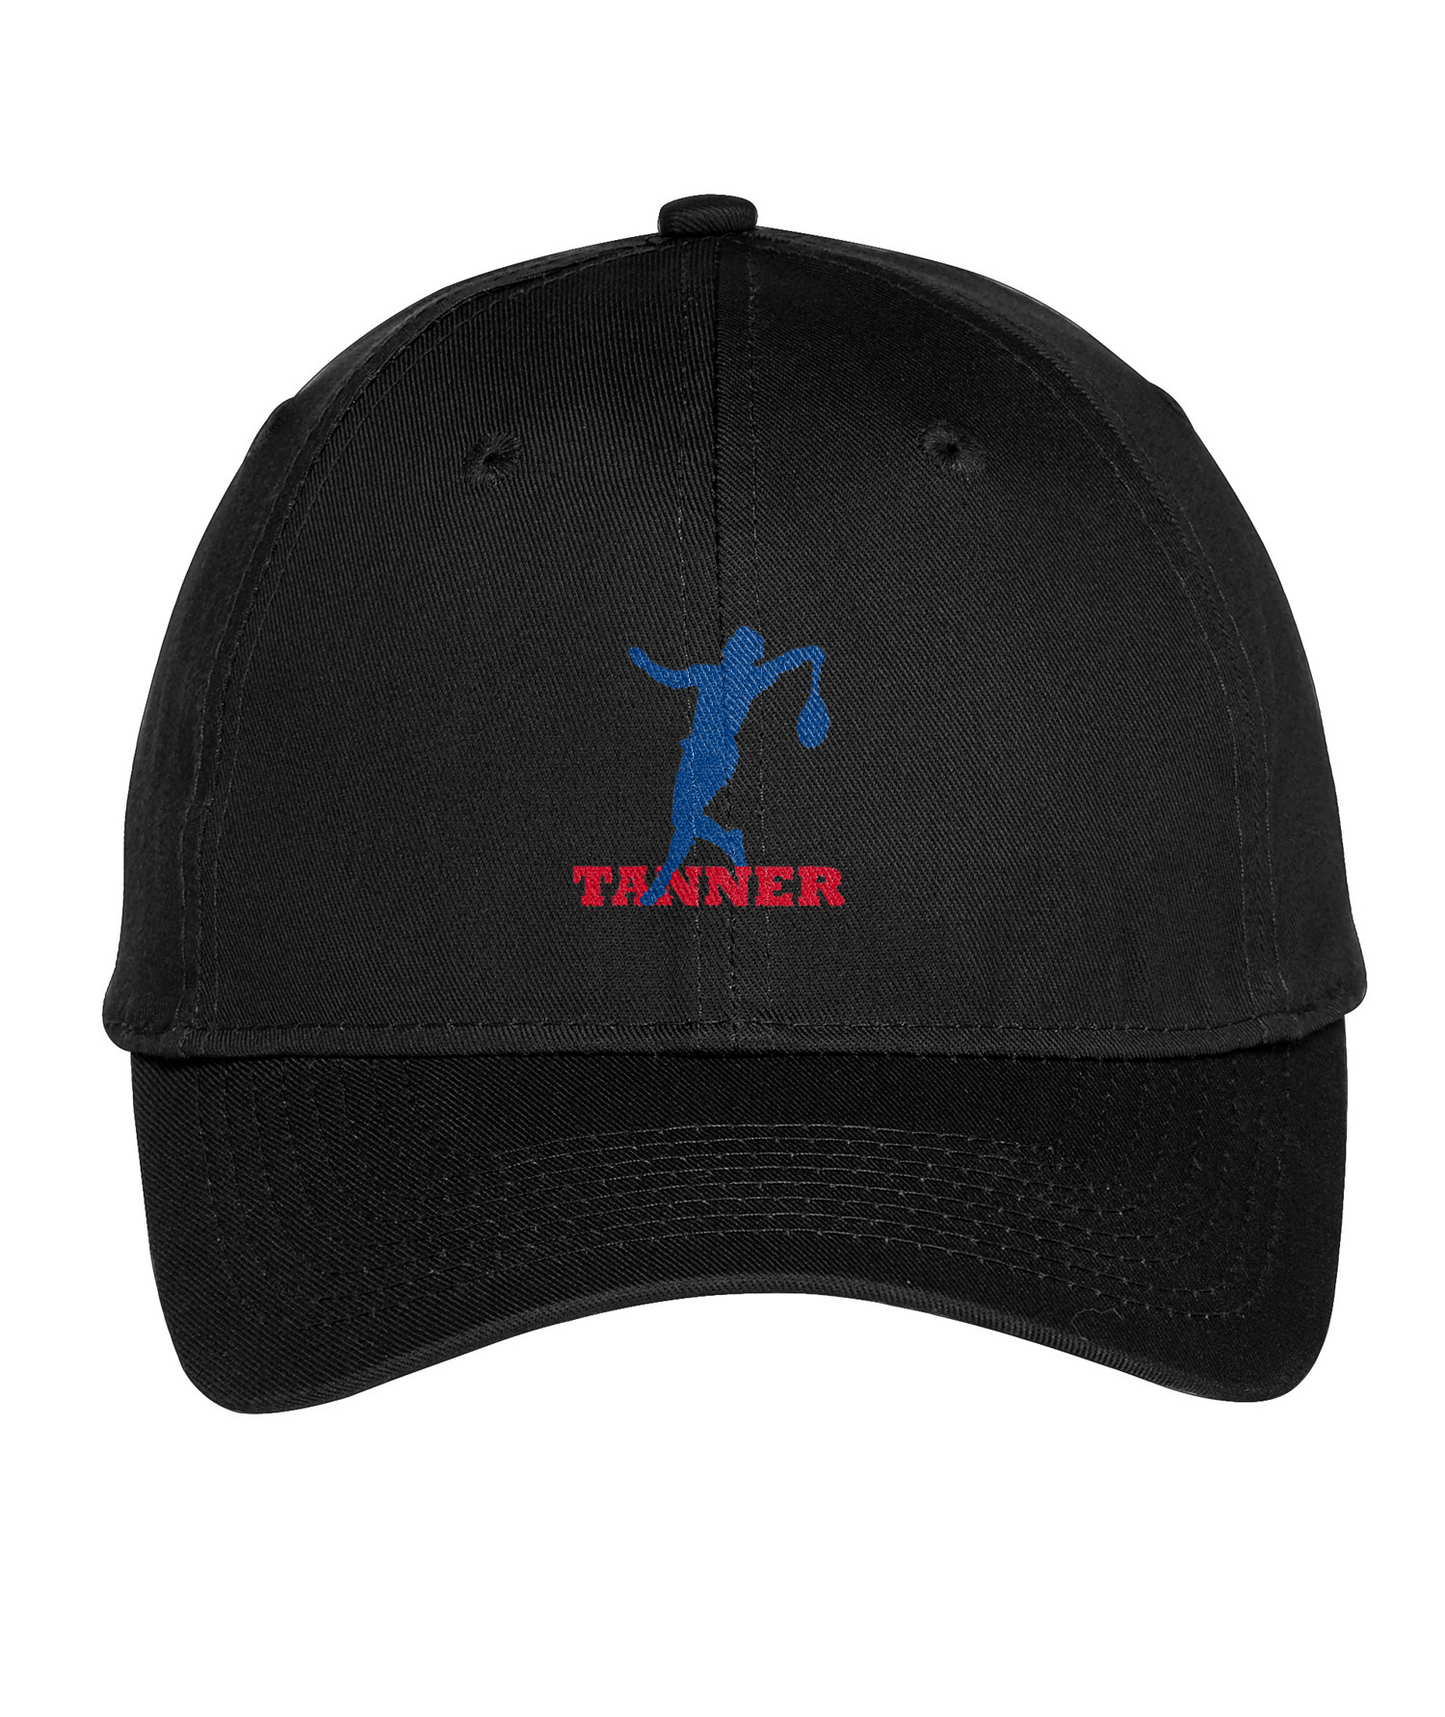 GT Tanner Embroidered Twill Cap